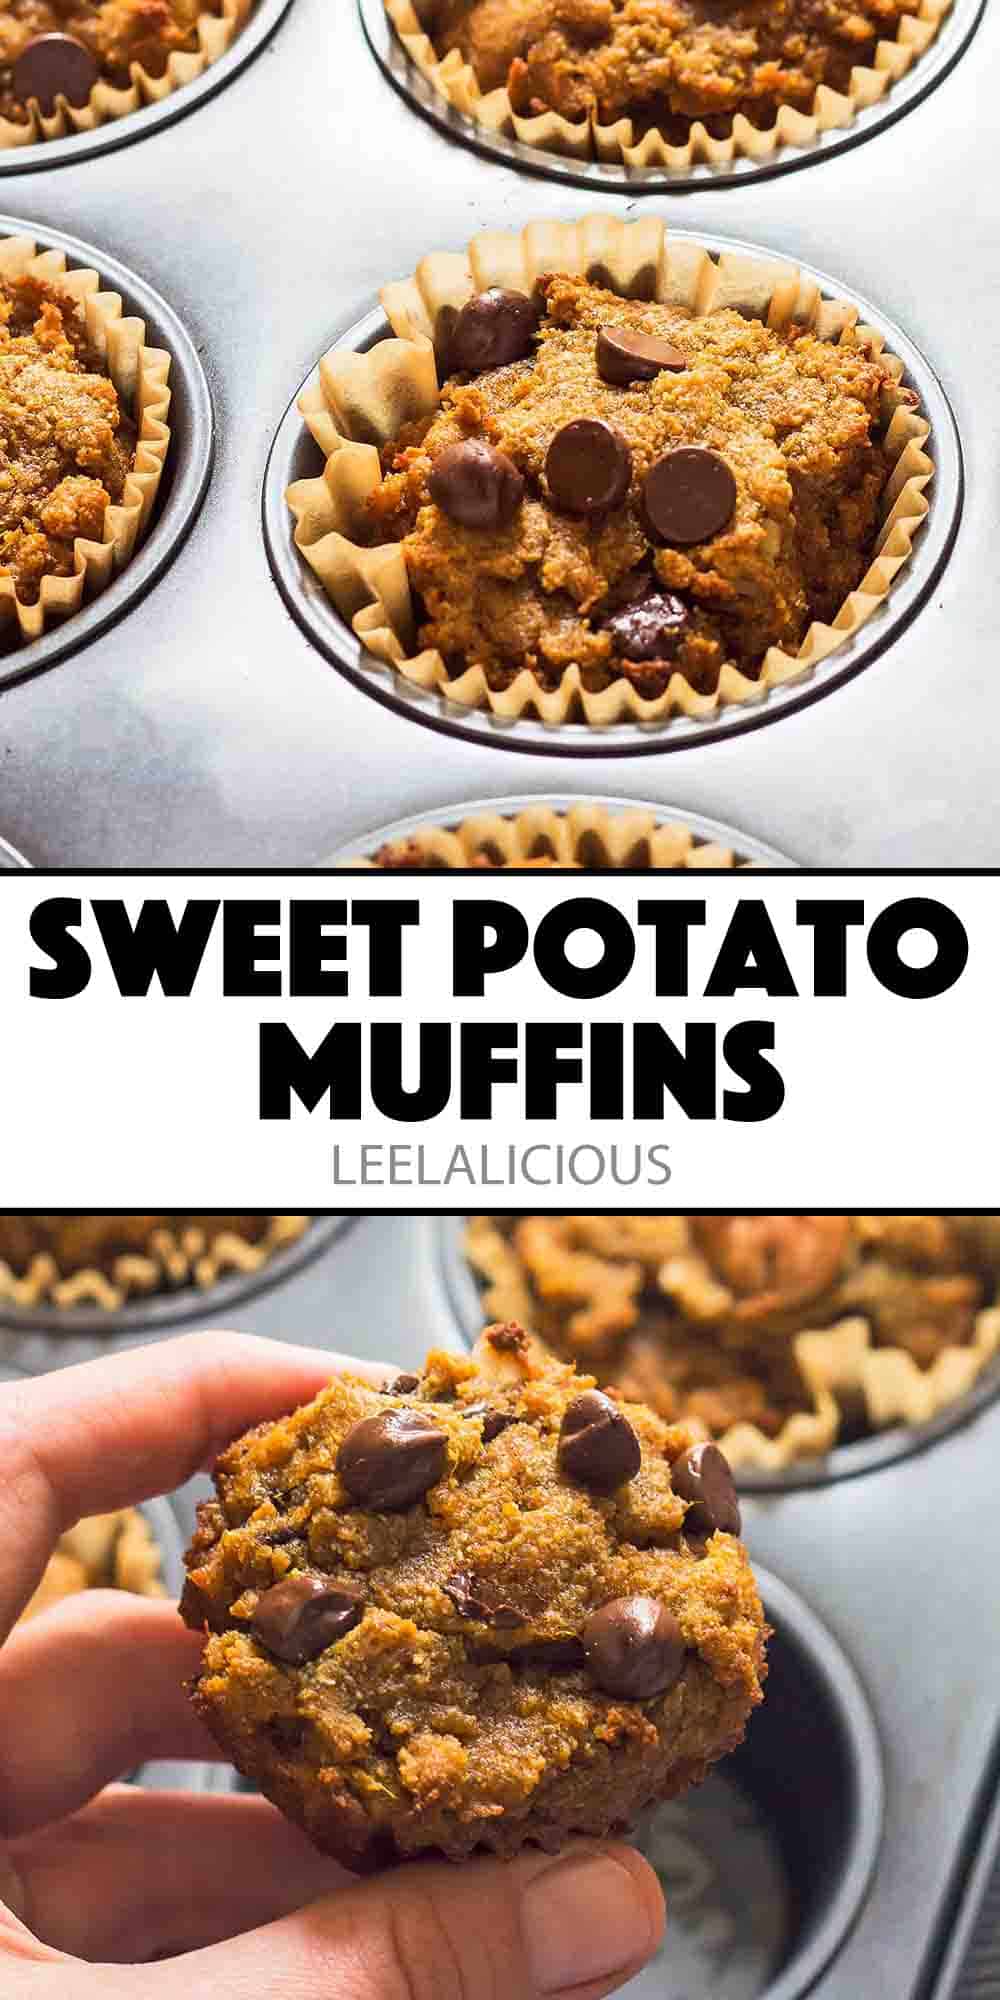 Pinterest image of sweet potato muffins in muffin tin and hand holding up one